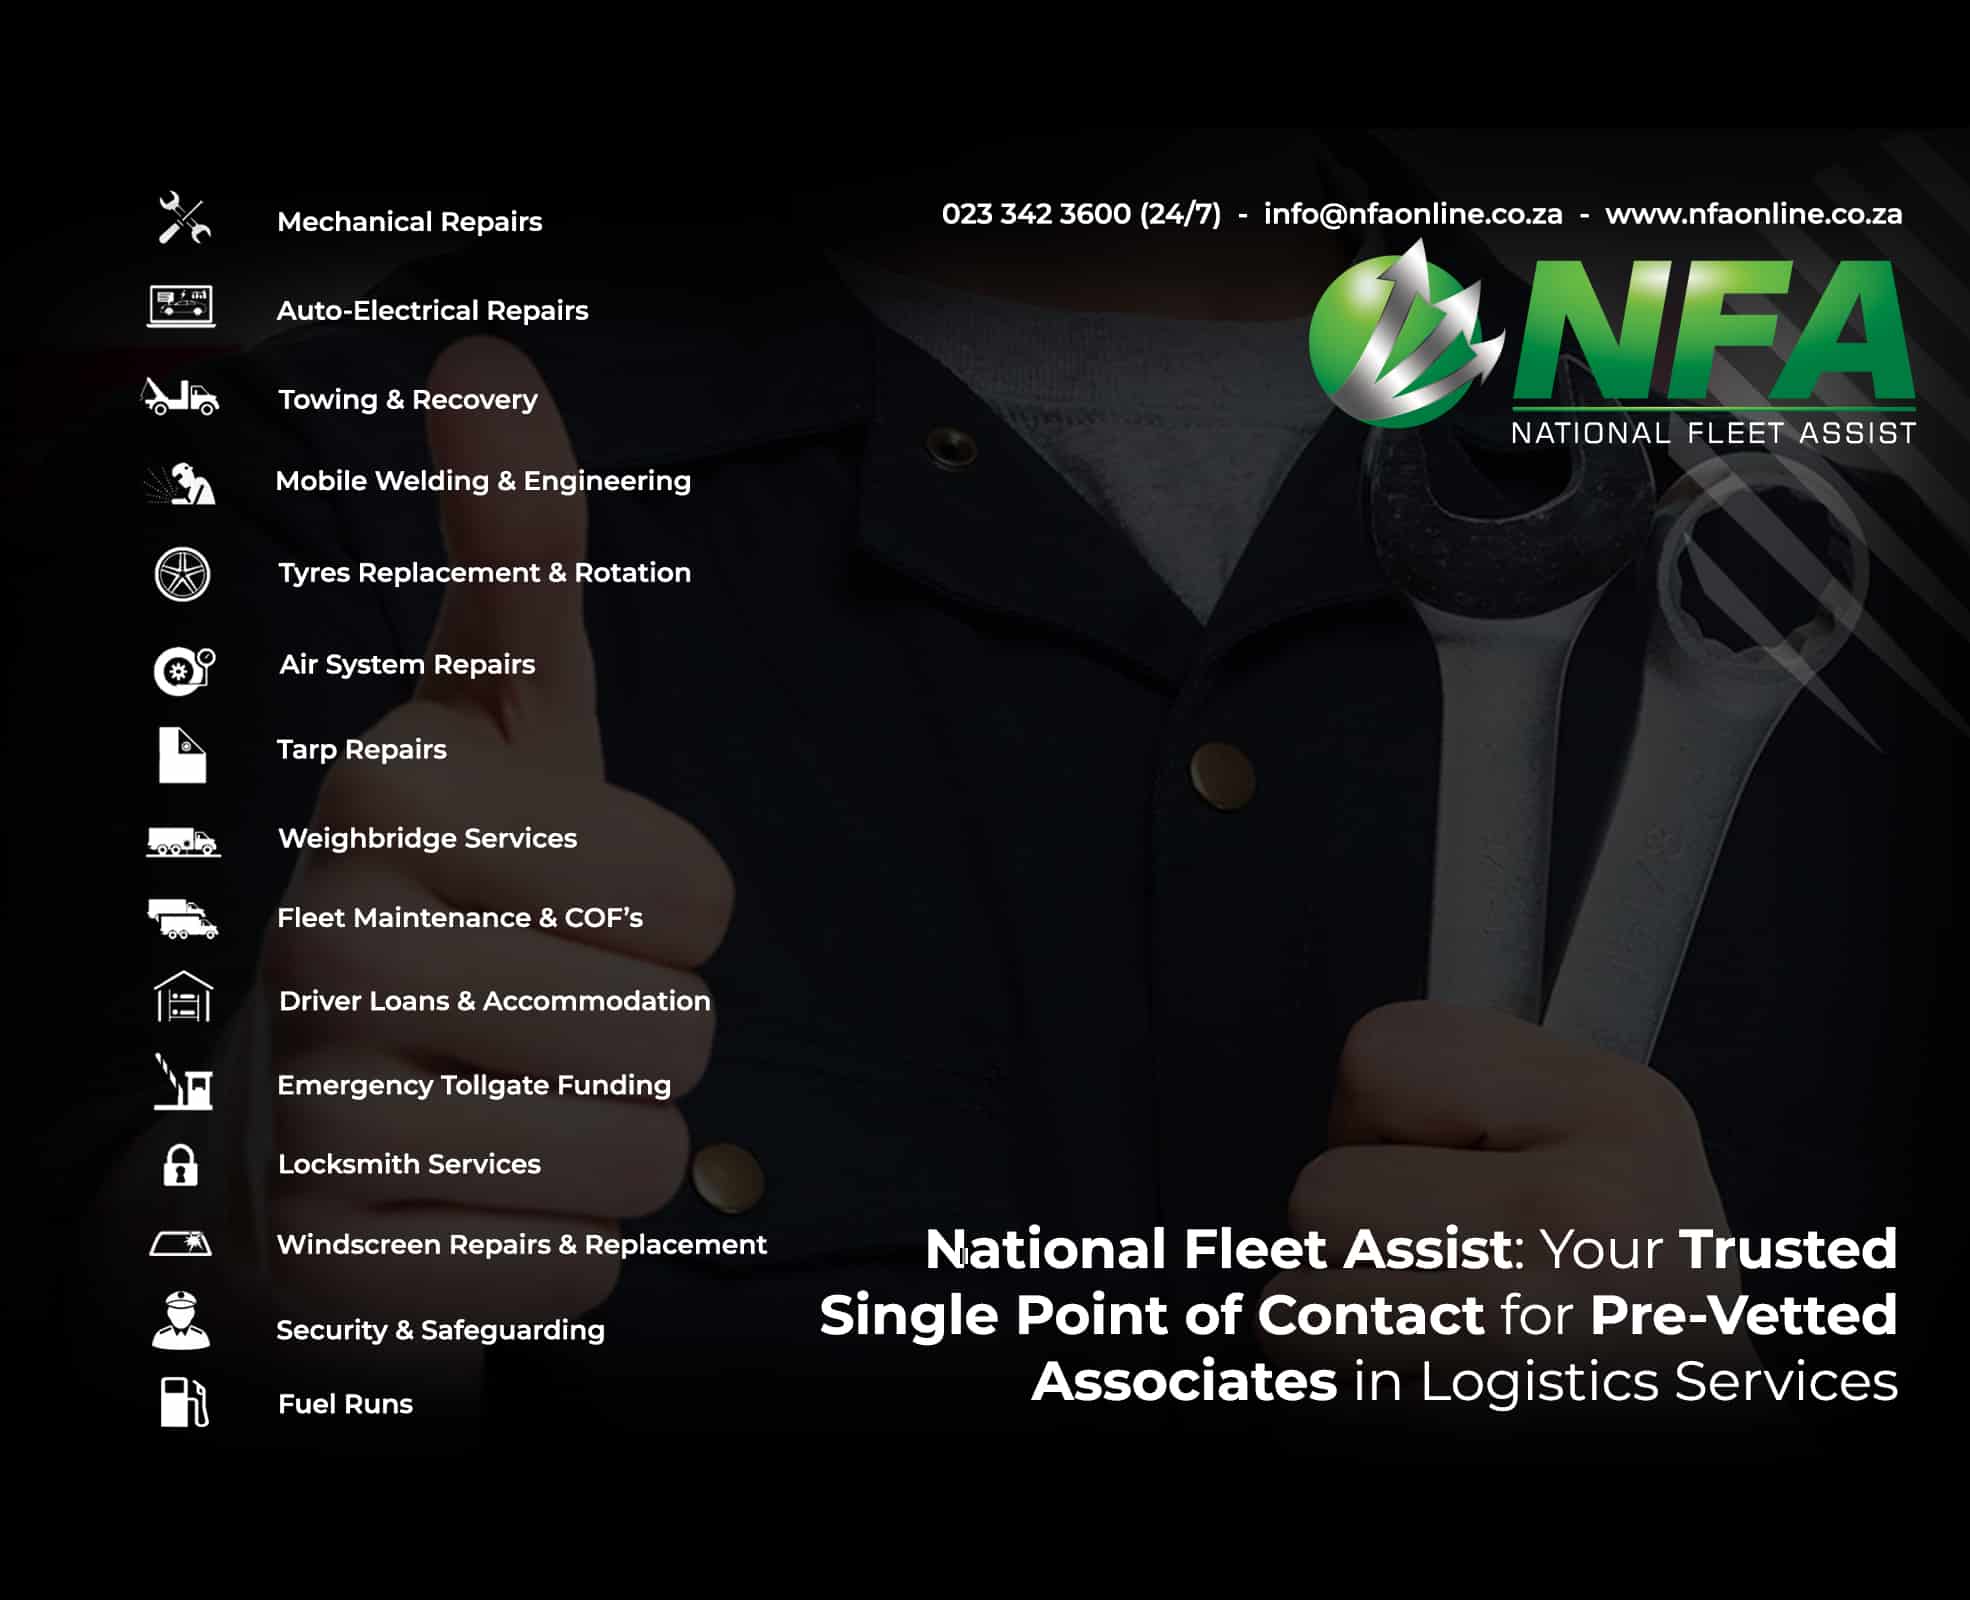 National Fleet Assist Trusted Single Point of Contact for Pre Vetted Associates in Logistics Services